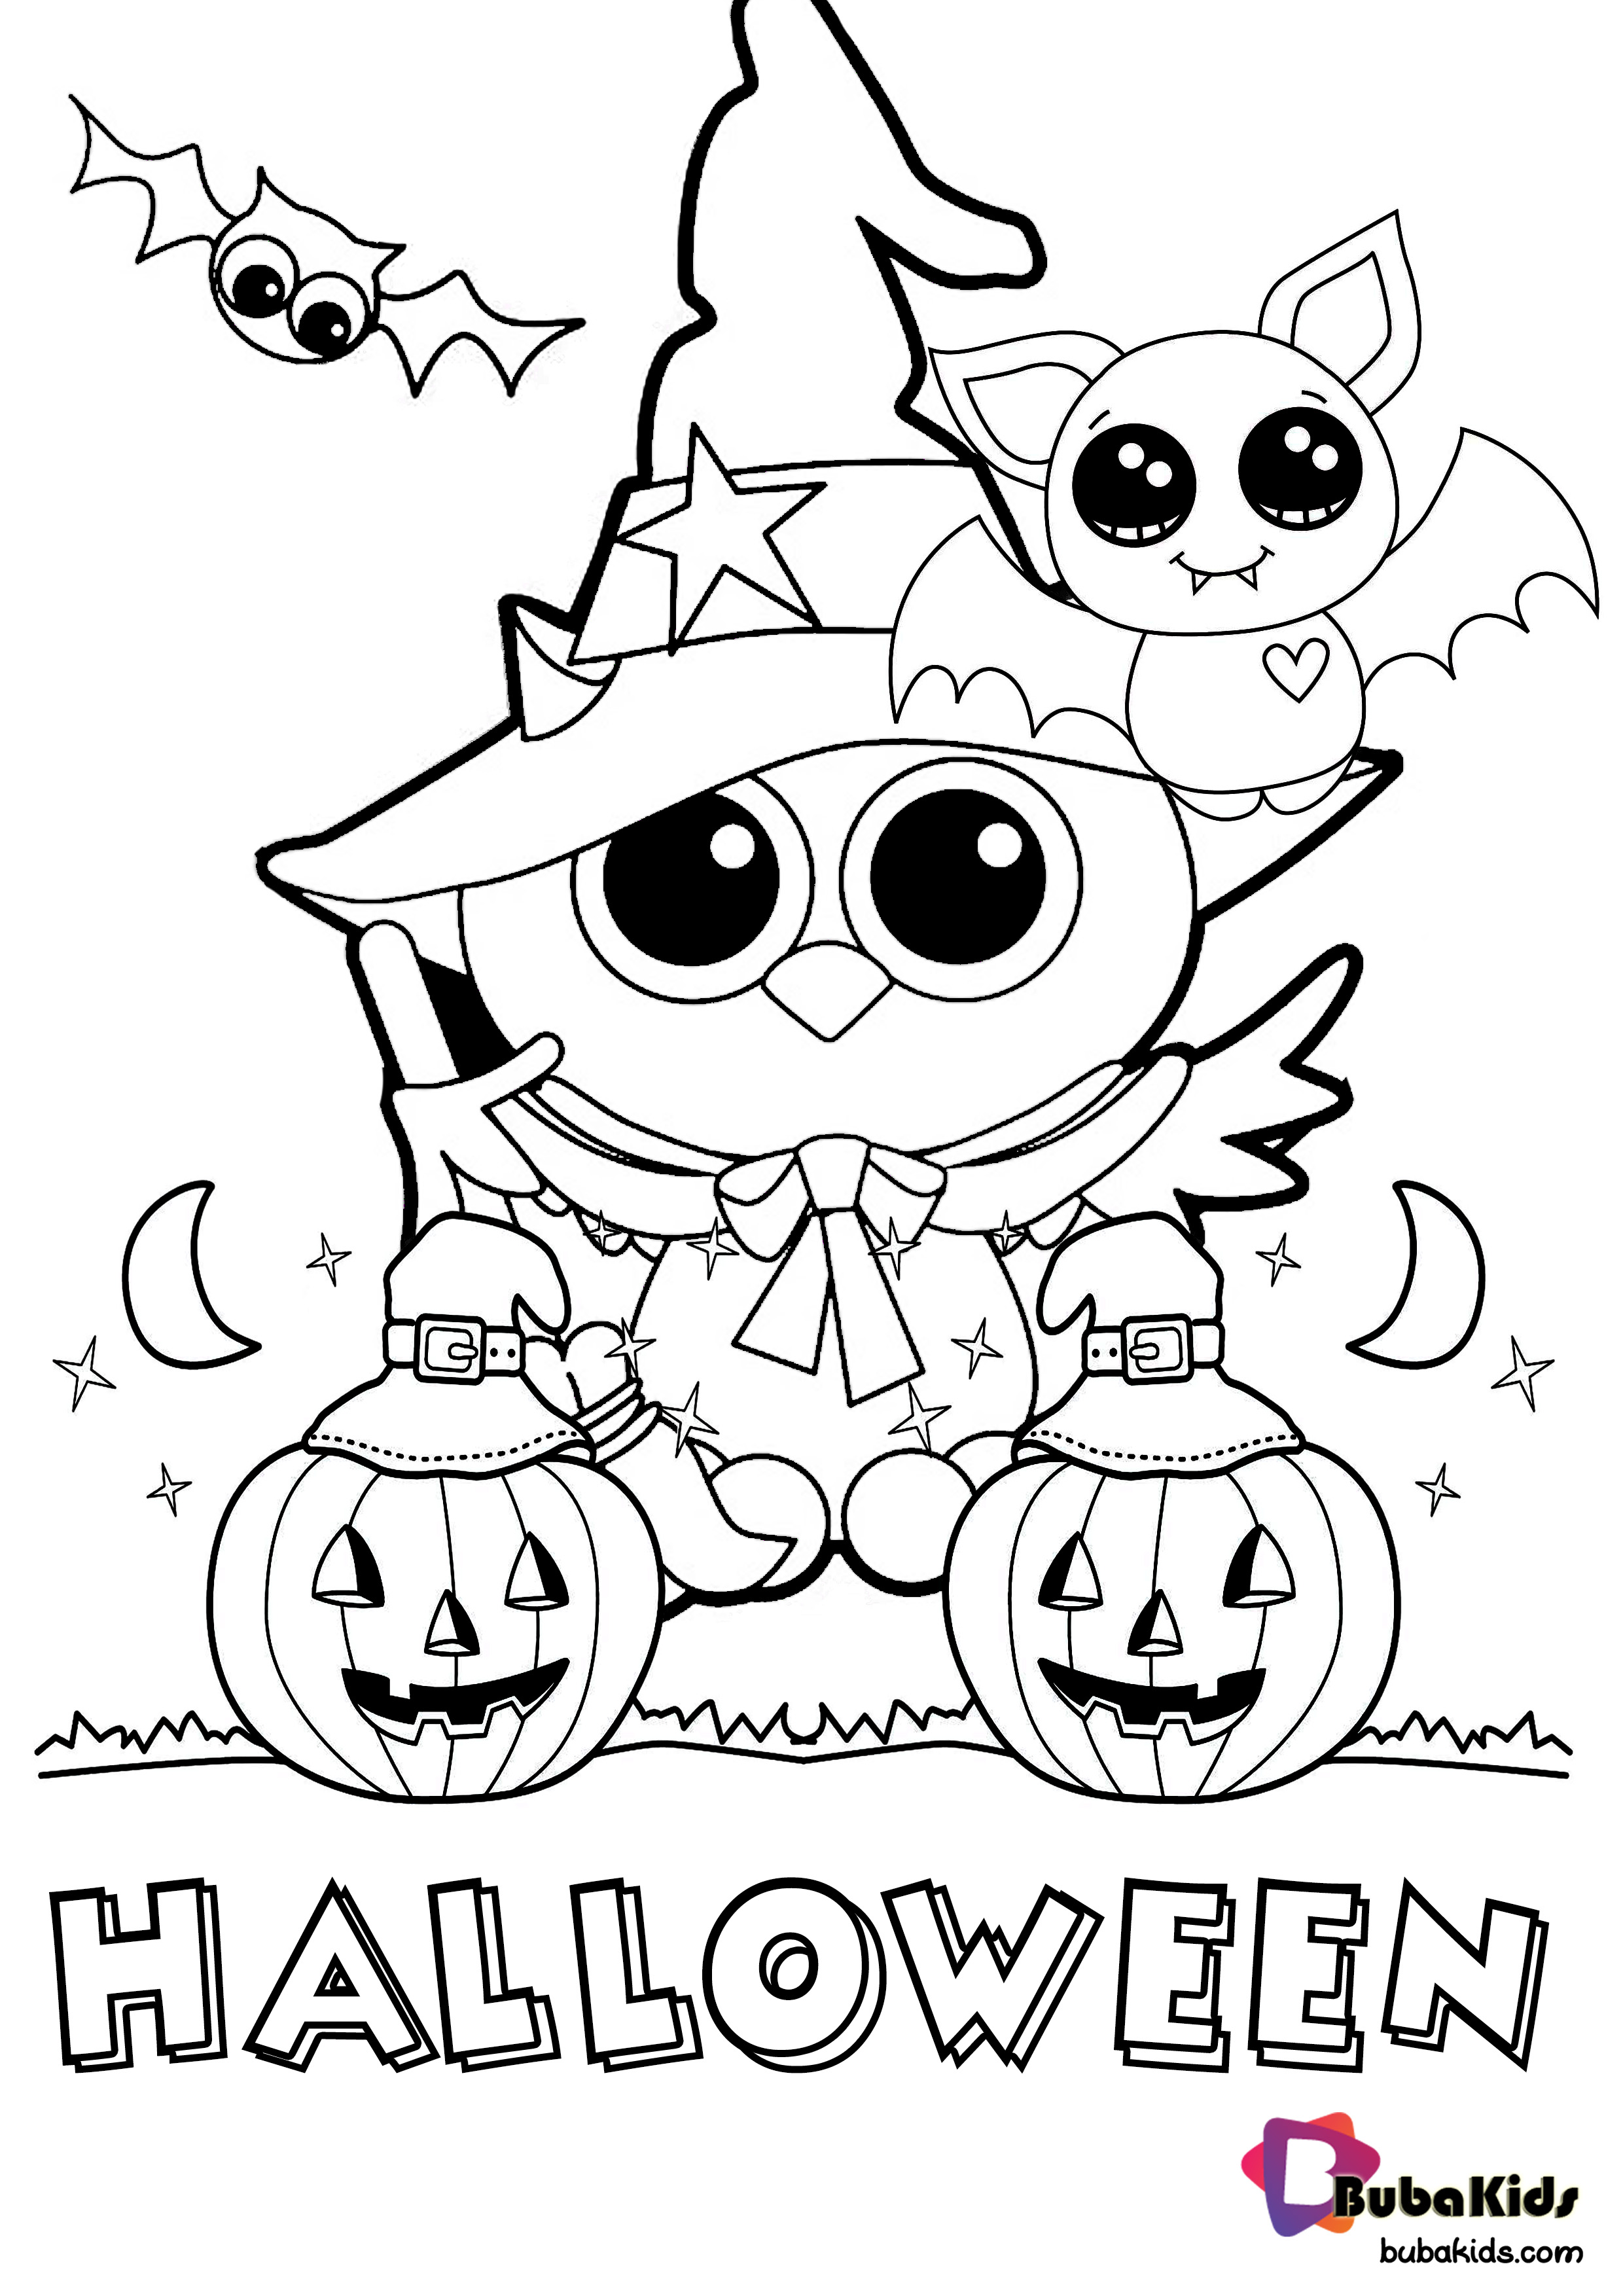 Halloween Coloring Pages Printable Free - BubaKids.com